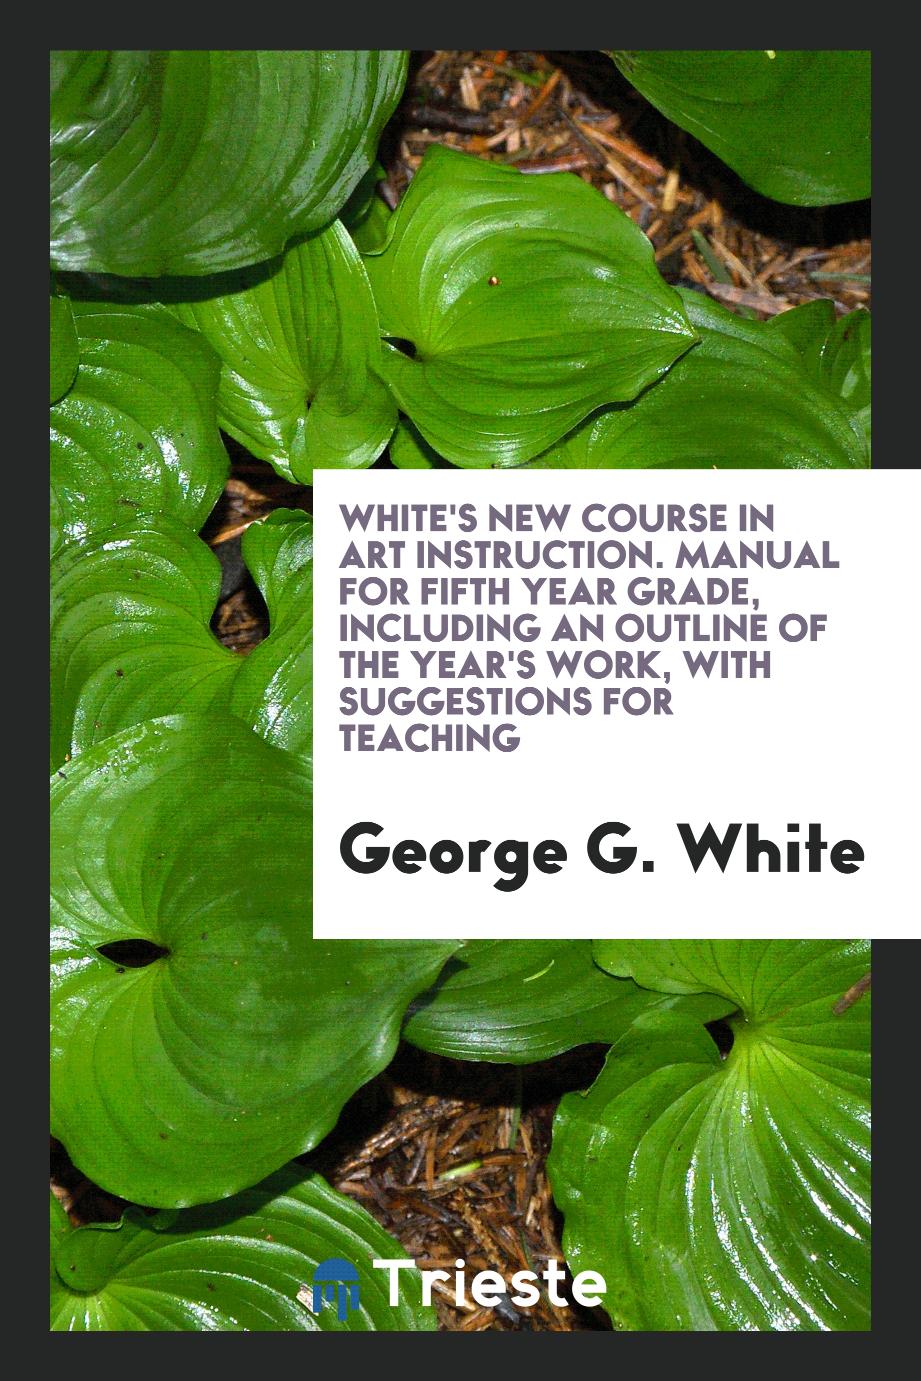 White's New Course in Art Instruction. Manual for Fifth Year Grade, Including an Outline of the Year's Work, with Suggestions for Teaching